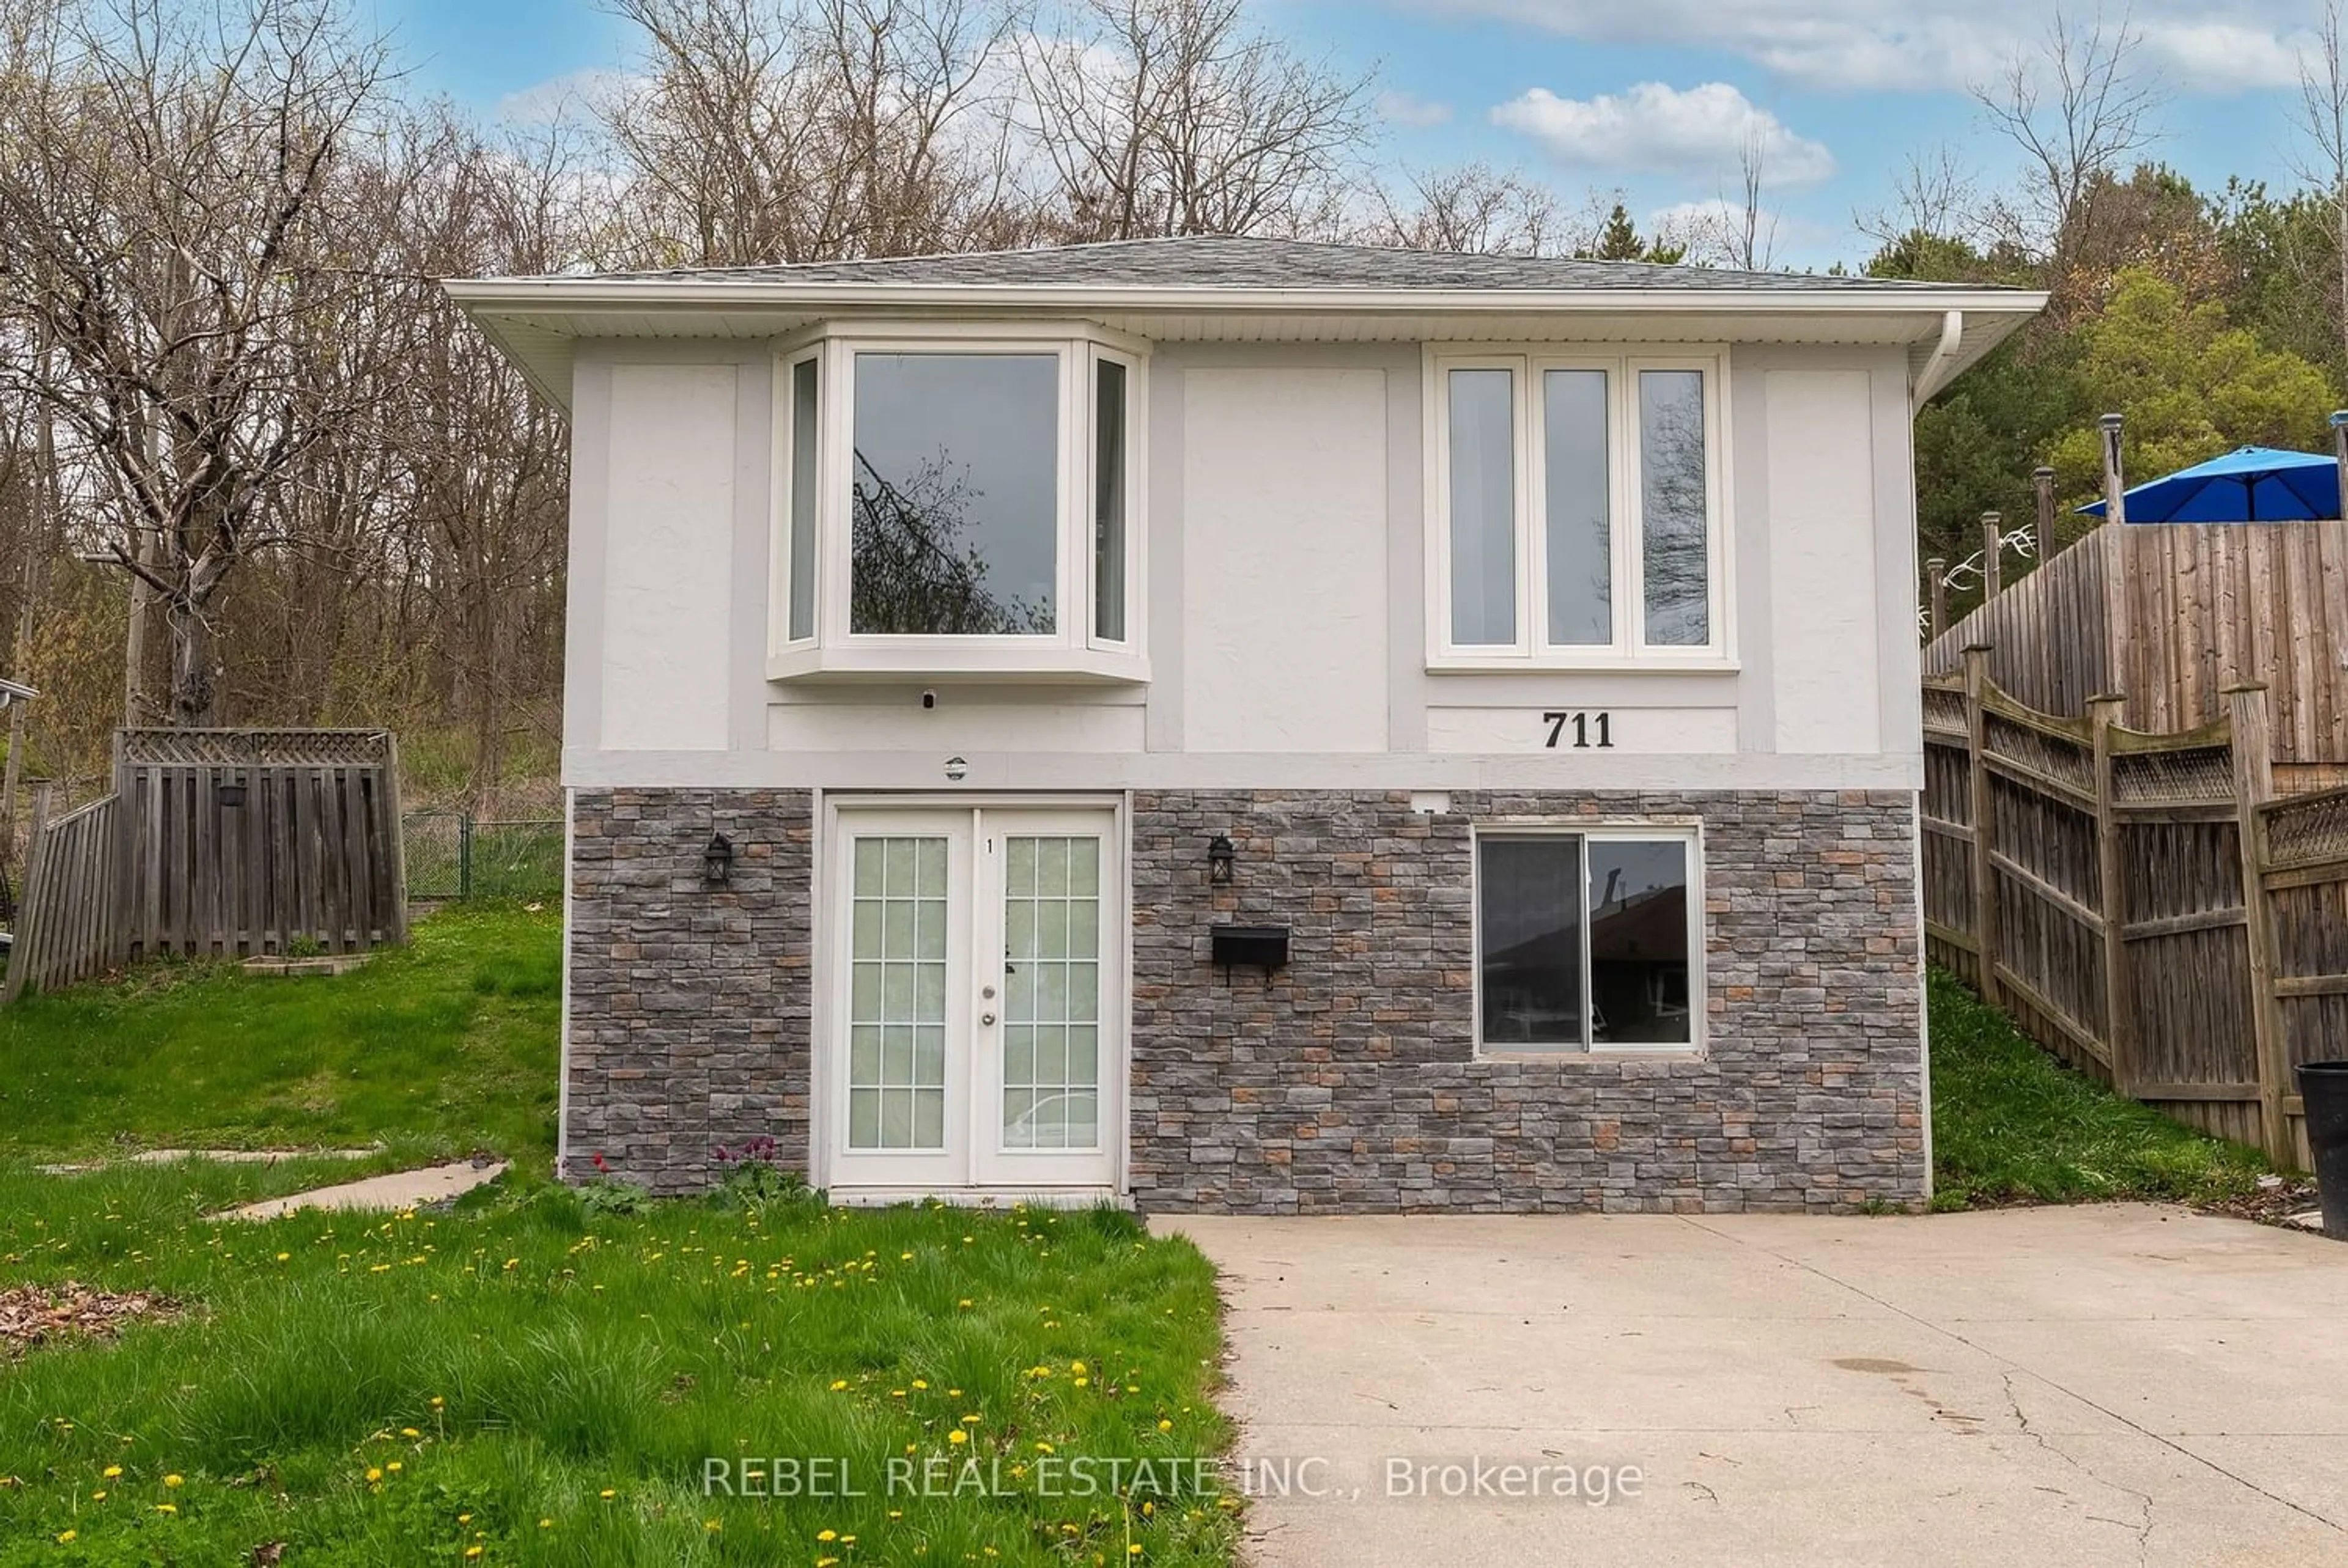 Frontside or backside of a home for 711 Wesley Dr, Oshawa Ontario L1H 7X6